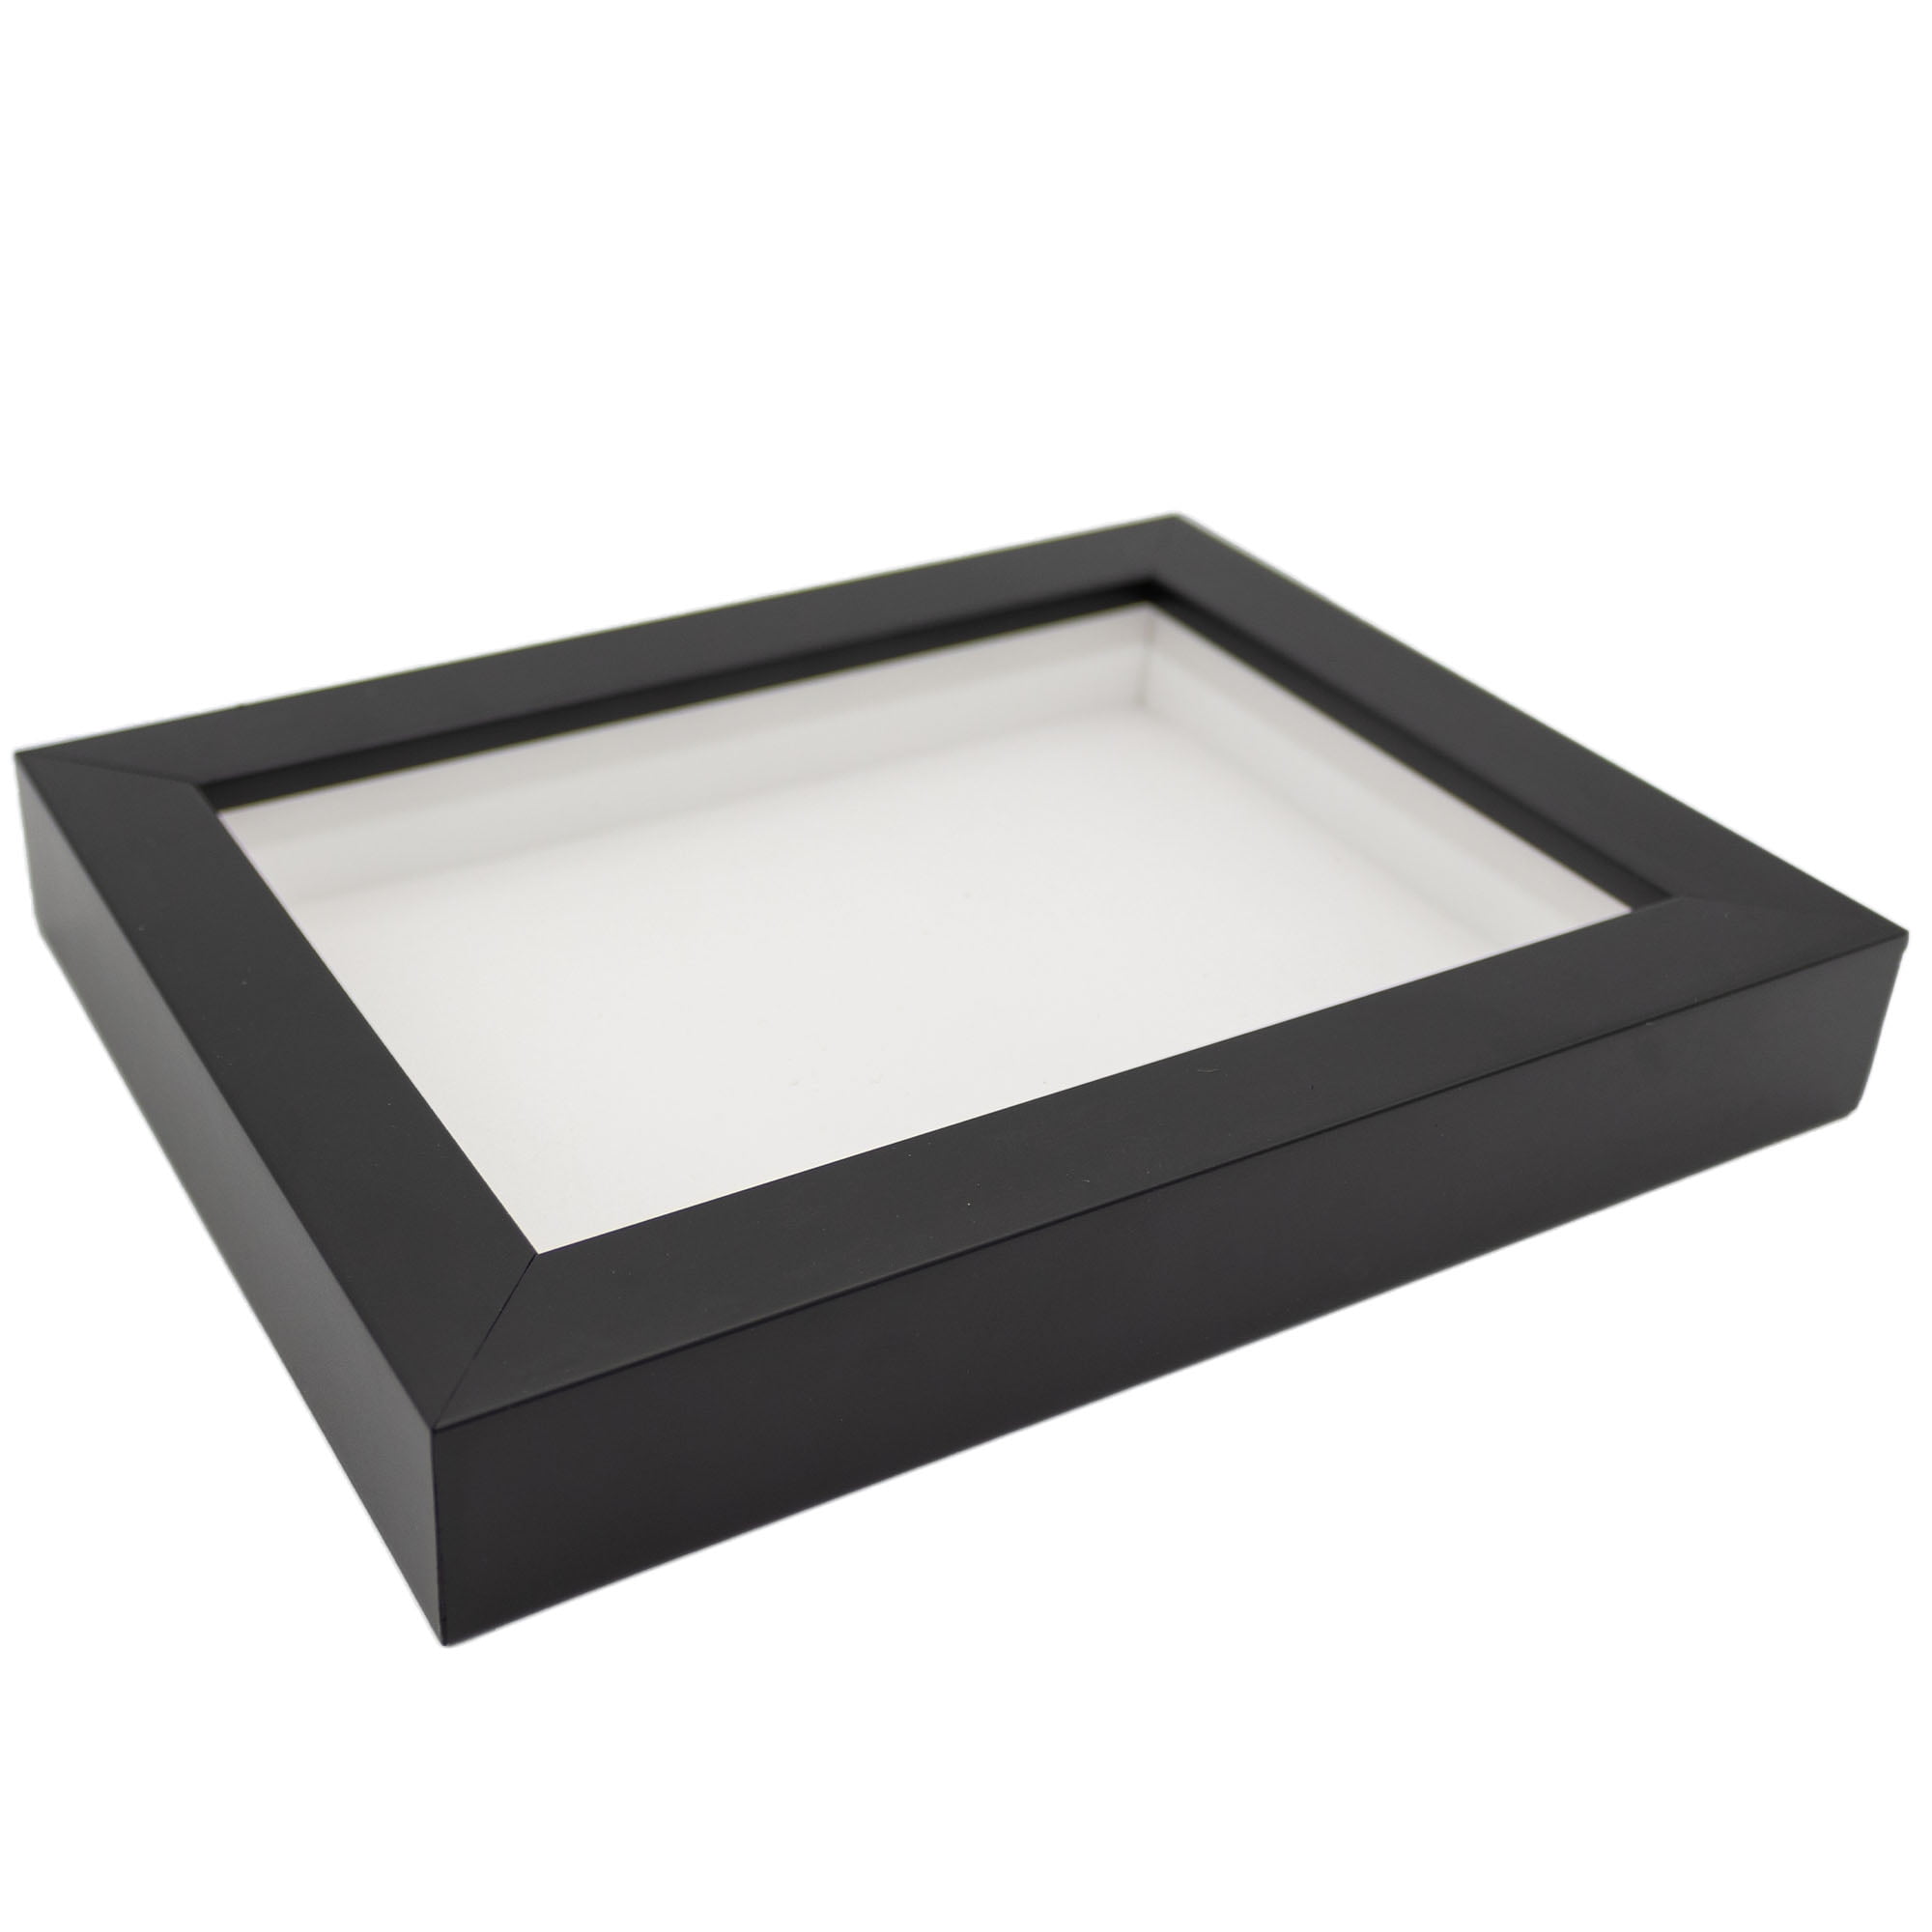 6 Pieces 8 x 8 Inches Shadow Box Frame Black Wood Shadow Boxes Display  Cases, 1.2 Inch Interior Depth Shadow Box for Wall and Tabletop Display  Ideal